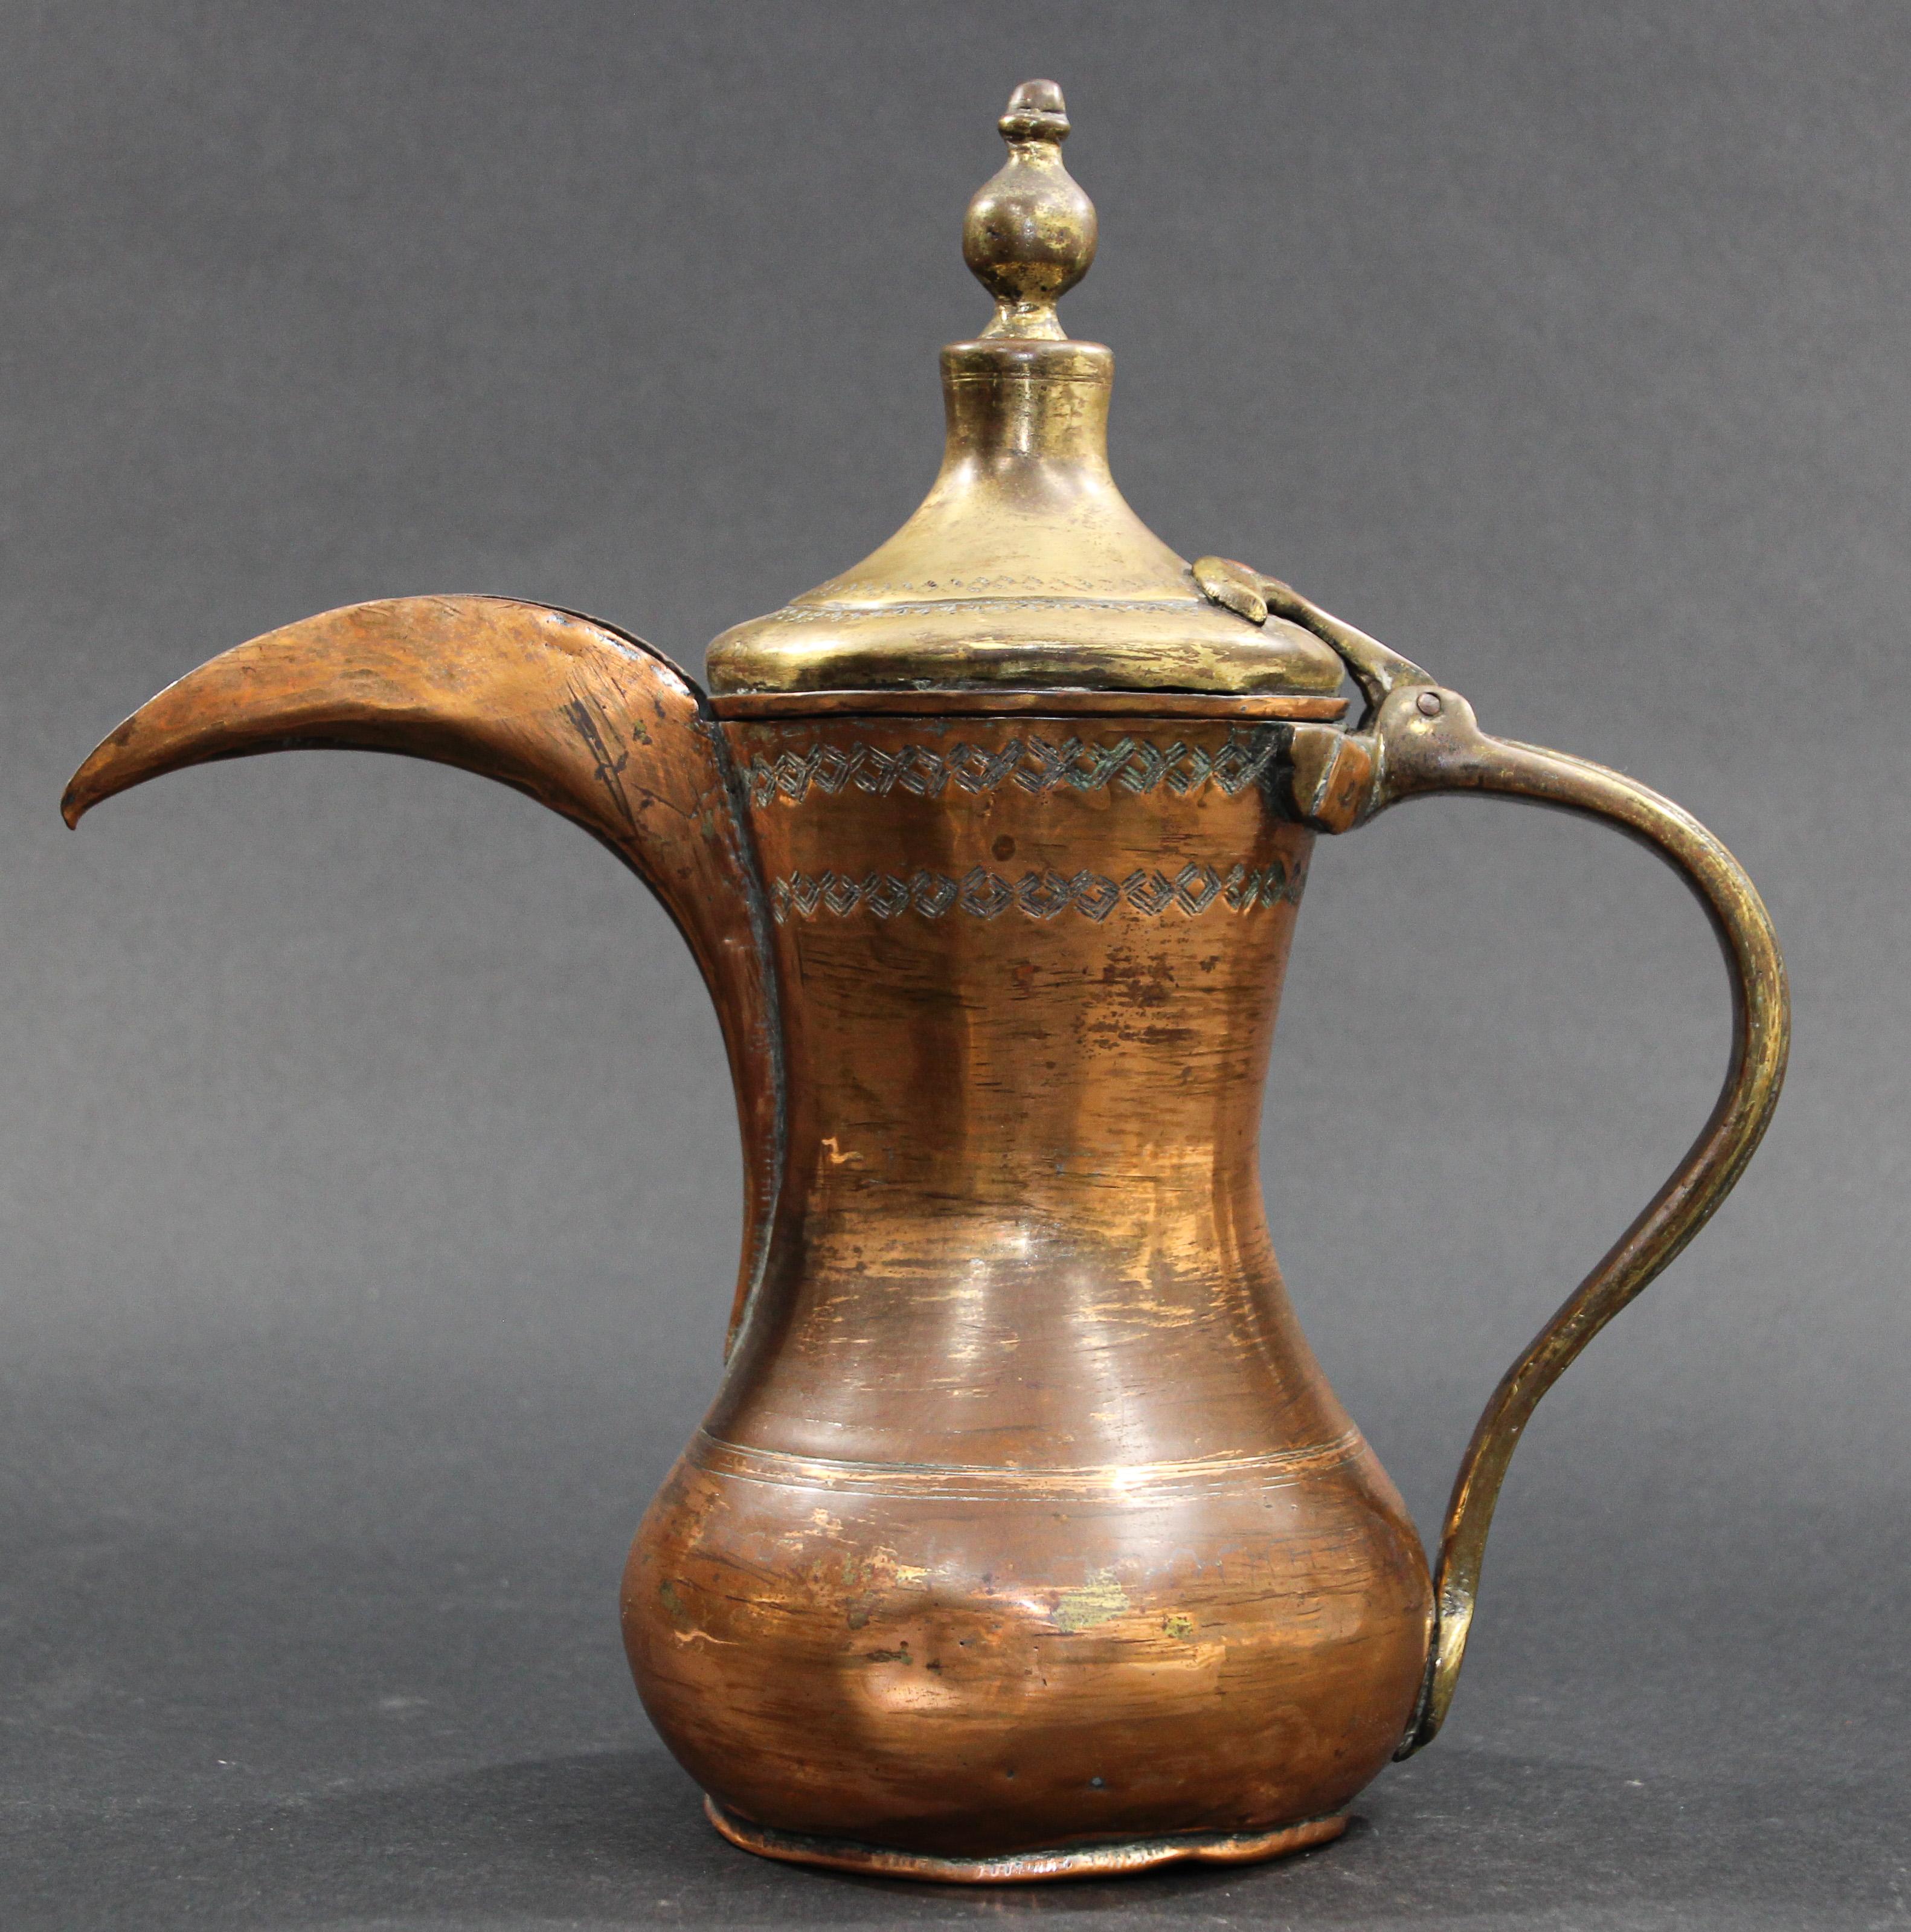 19th century antique Middle Eastern traditional Arabian tinned copper and brass Dallah coffee pot. 
Islamic Moorish coffee pot hand-hammered and chased copper with riveted brass finish and a very large spout. 
Brass handle and lid cover.
Size: